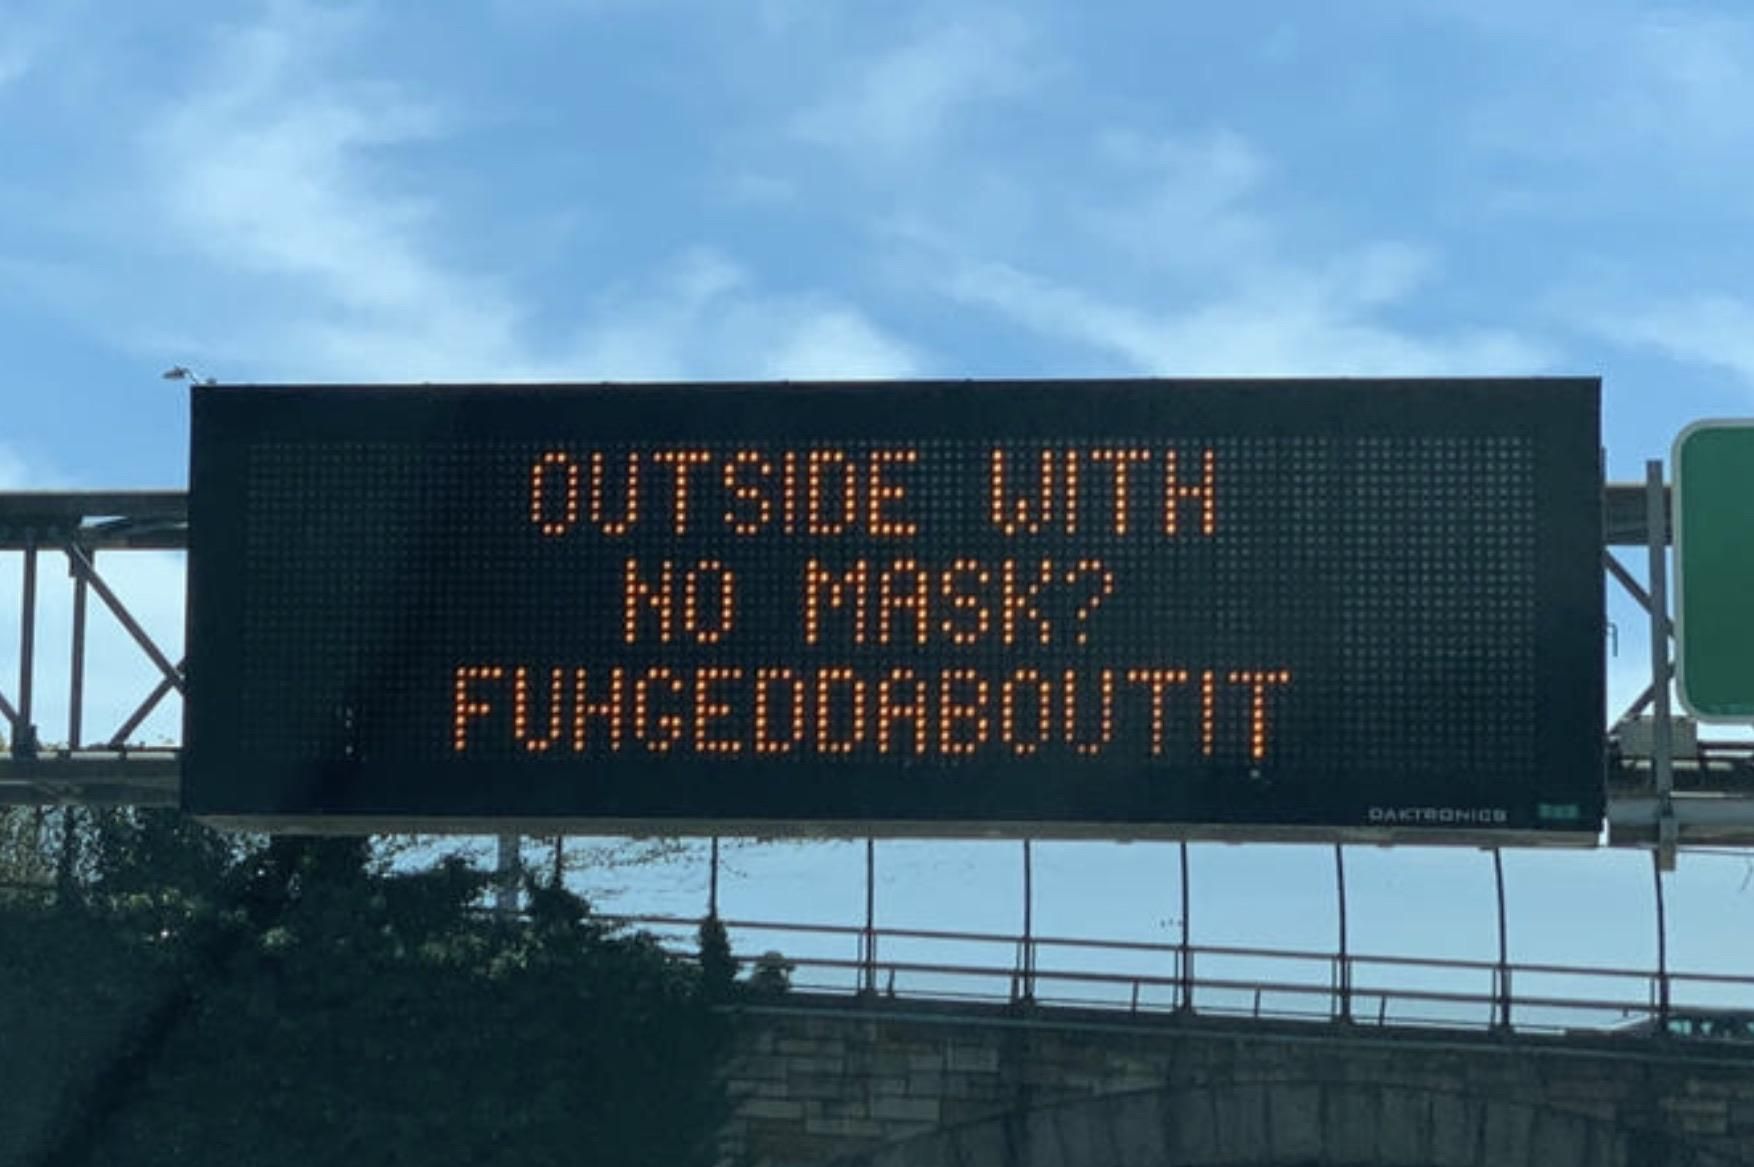 New York’s messaging on wearing masks is perfect.